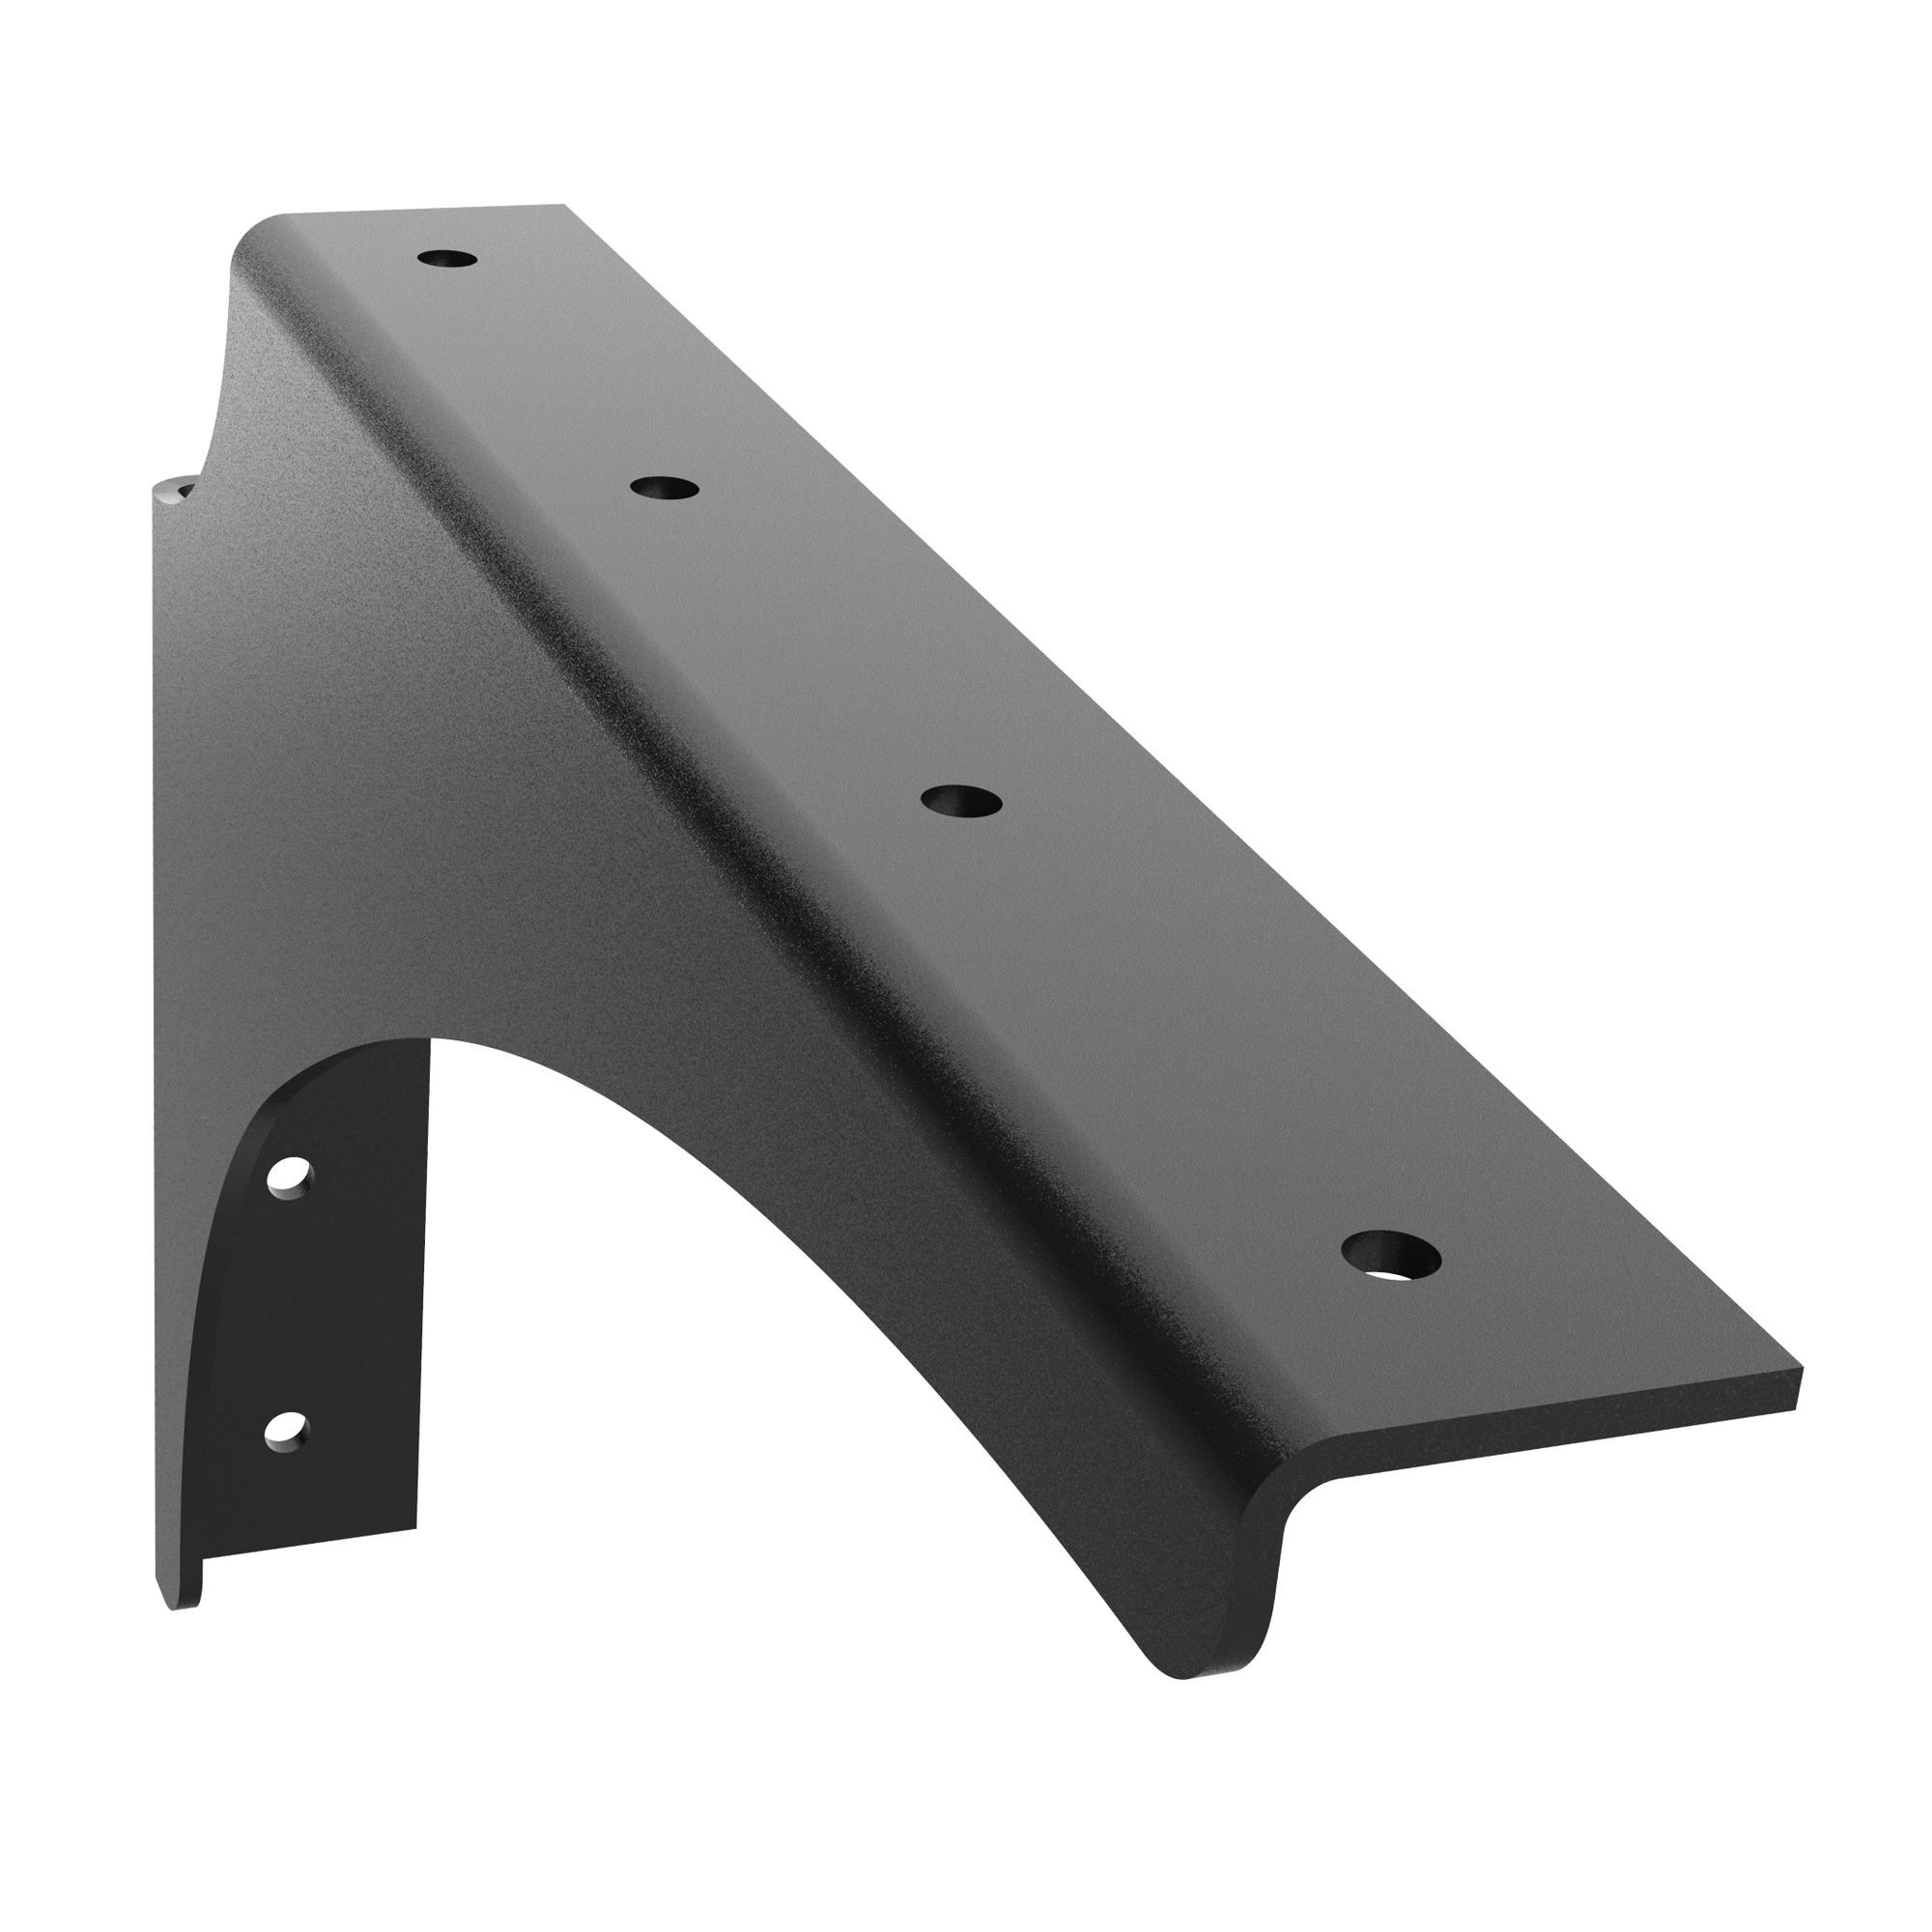 Universal Commercial Support Bracket - 12" x 8" Left Handed with Black Powder Coat Finish. Supports floating ADA-compliant vanities, desks, shelving, countertops, and more.